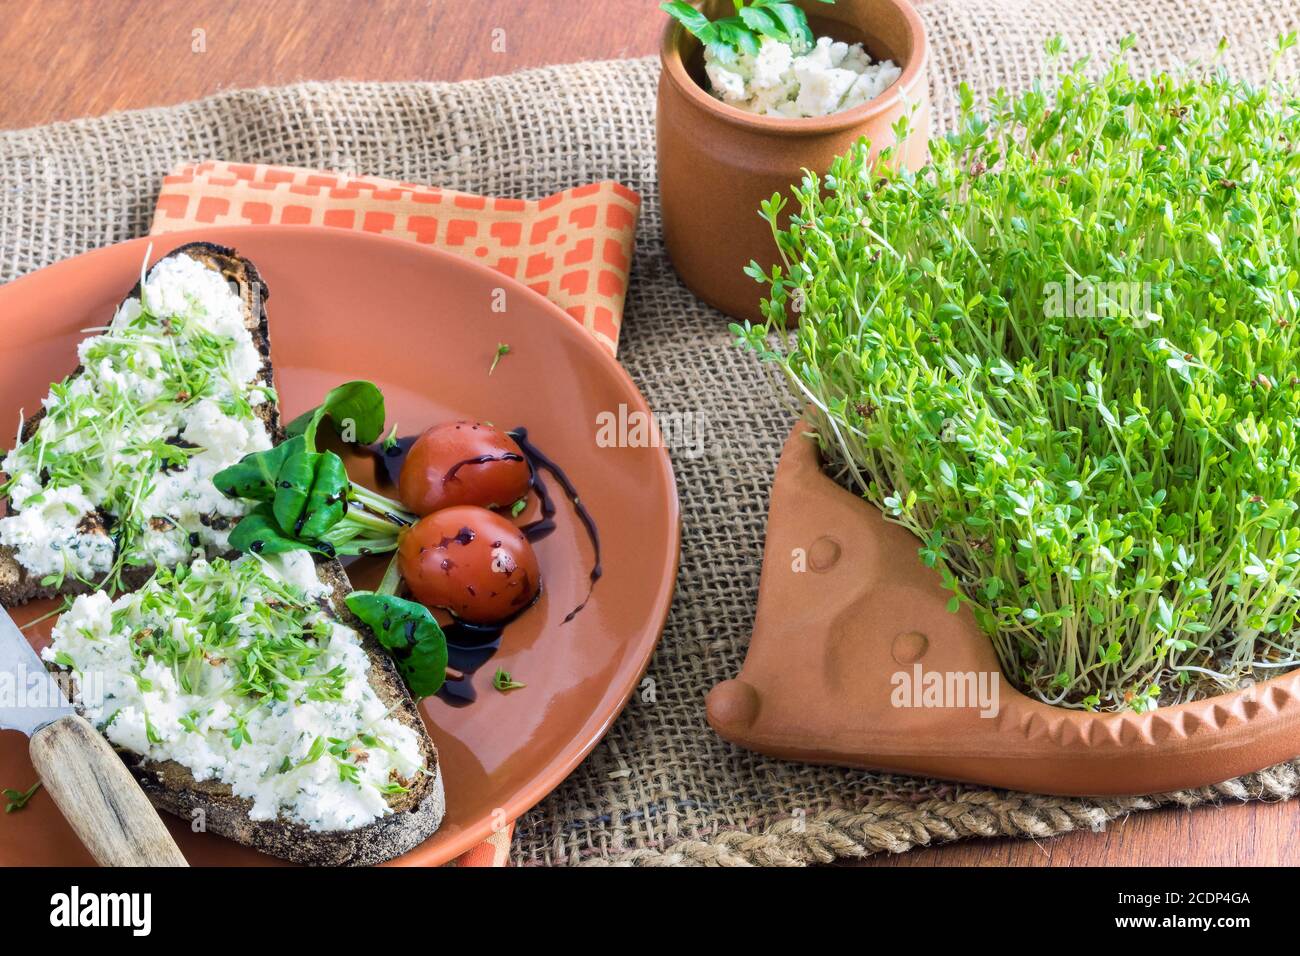 terracotta-hedgehog with home-grown garden cress and plate with brown bread and cream cheese Stock Photo